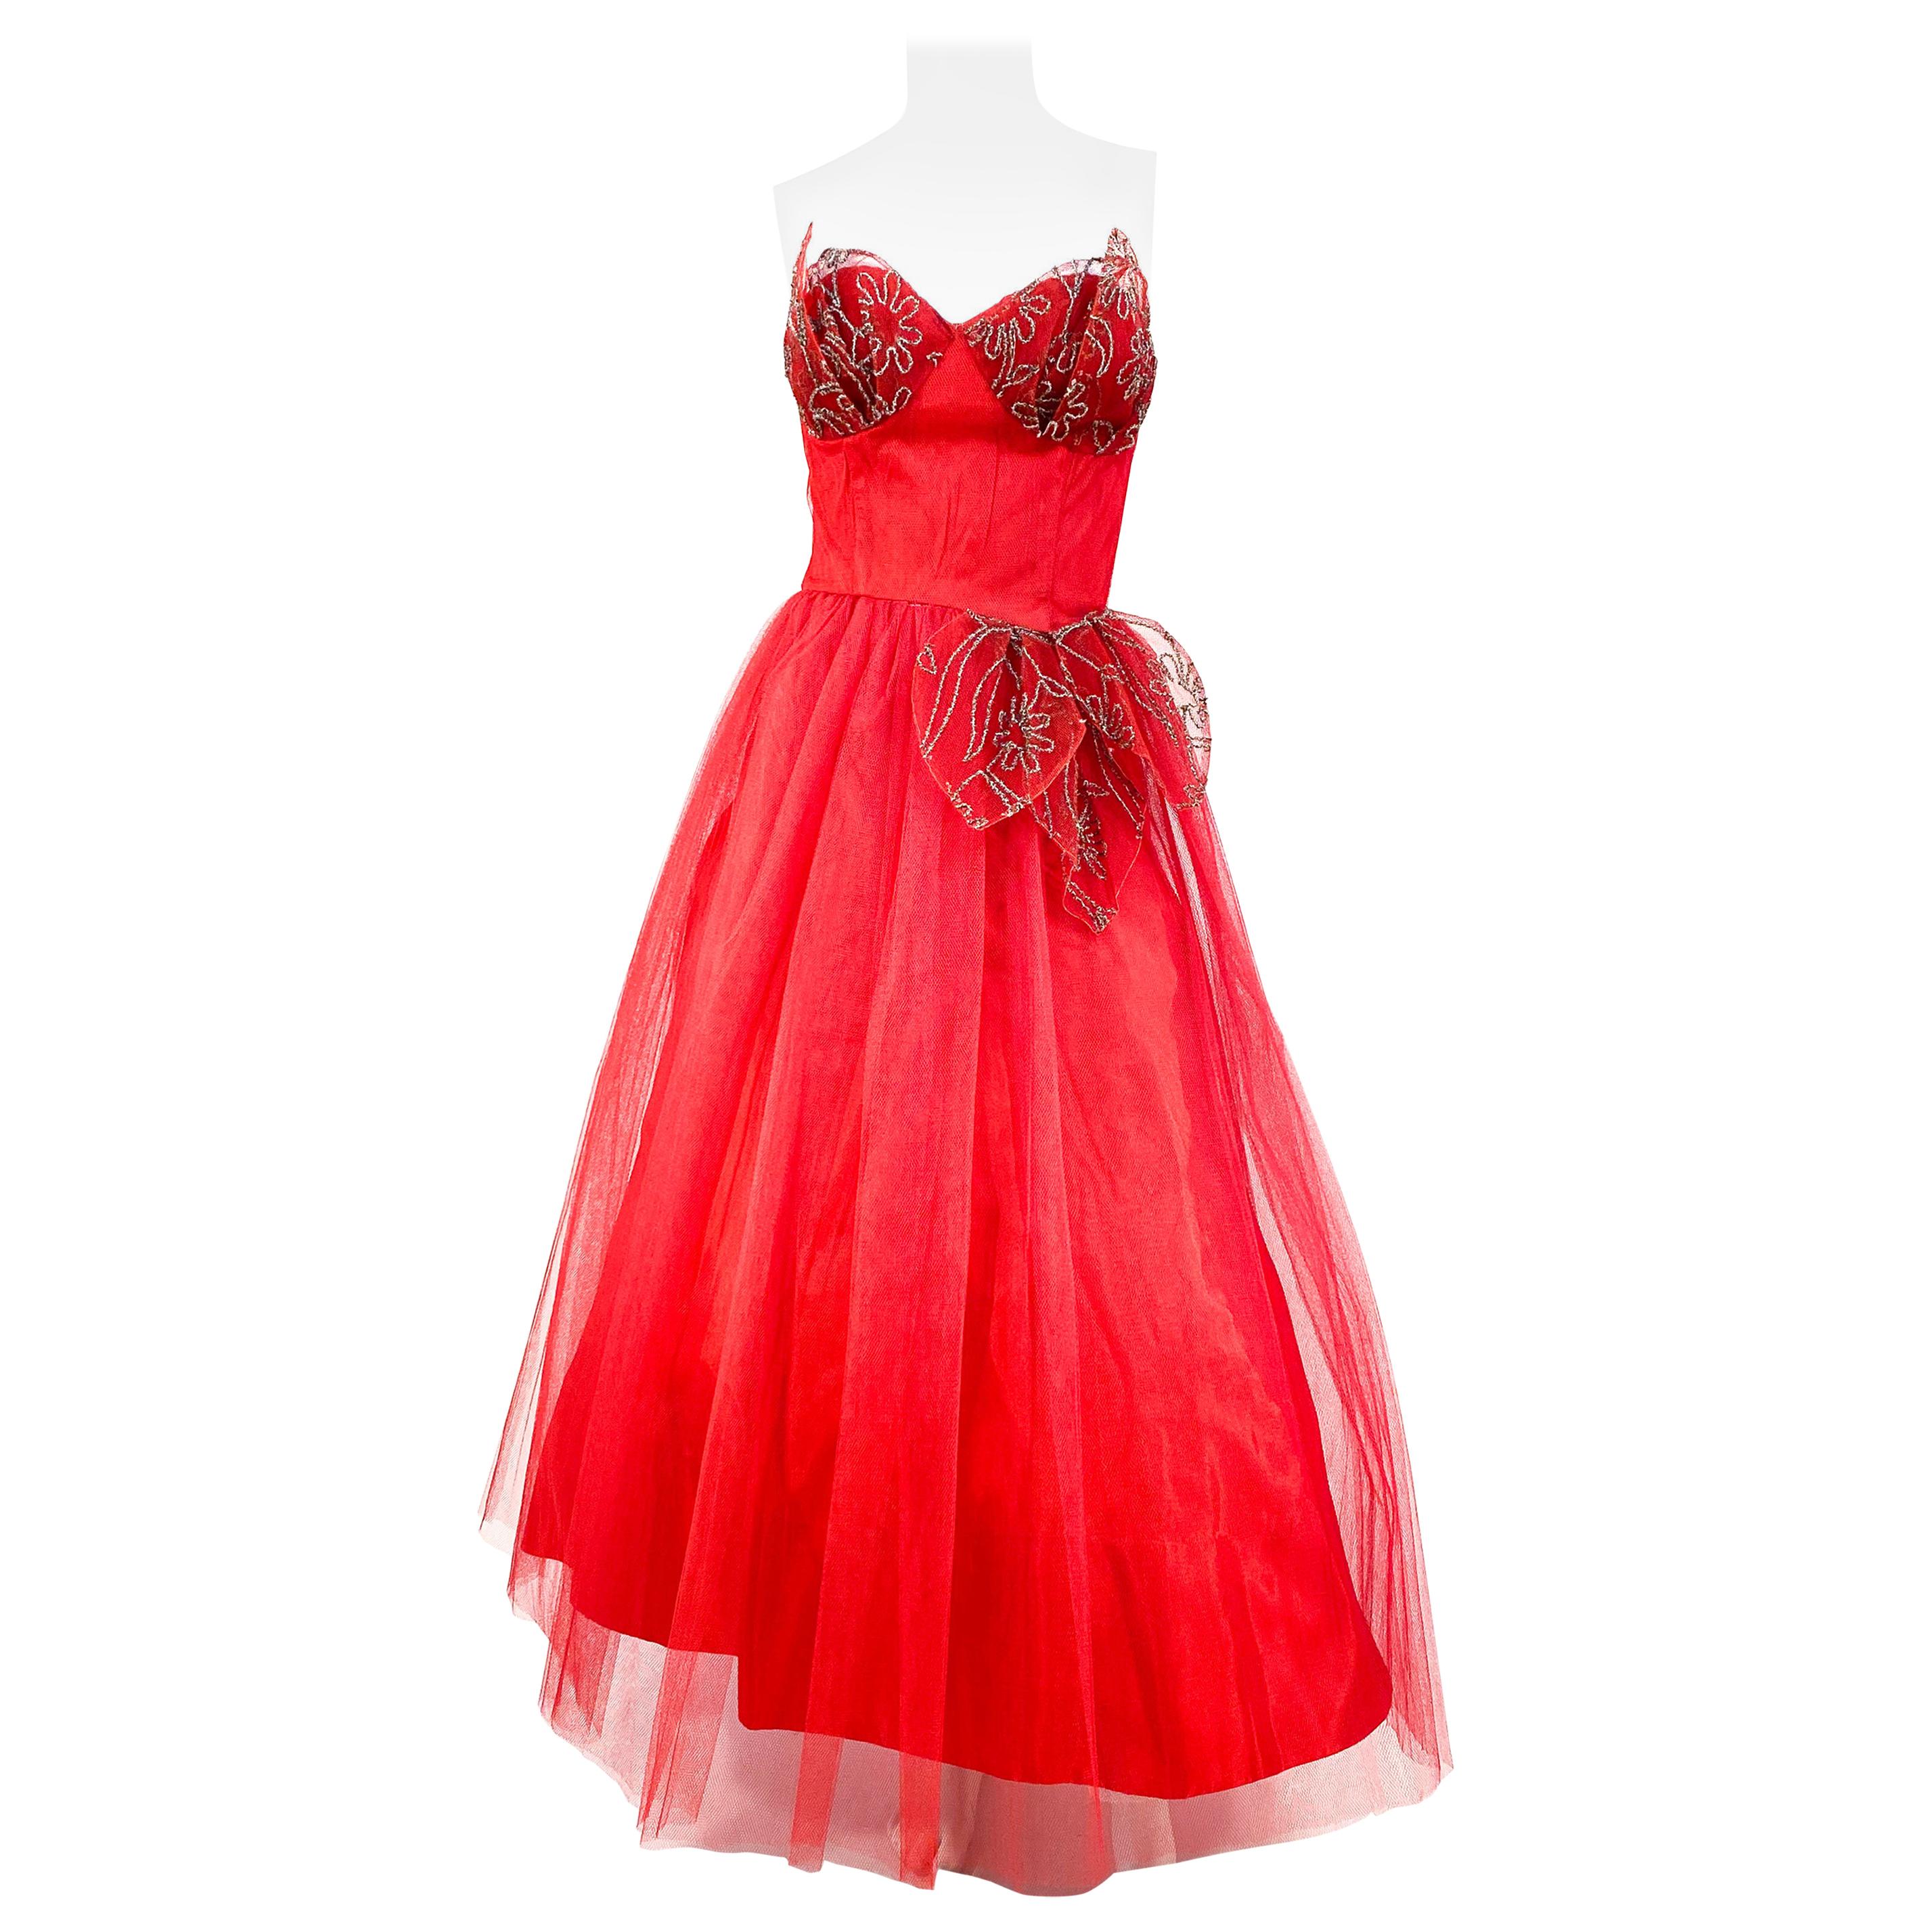 1950s Red Tulle Party Dress with Metallic Embroidered Petal Accents